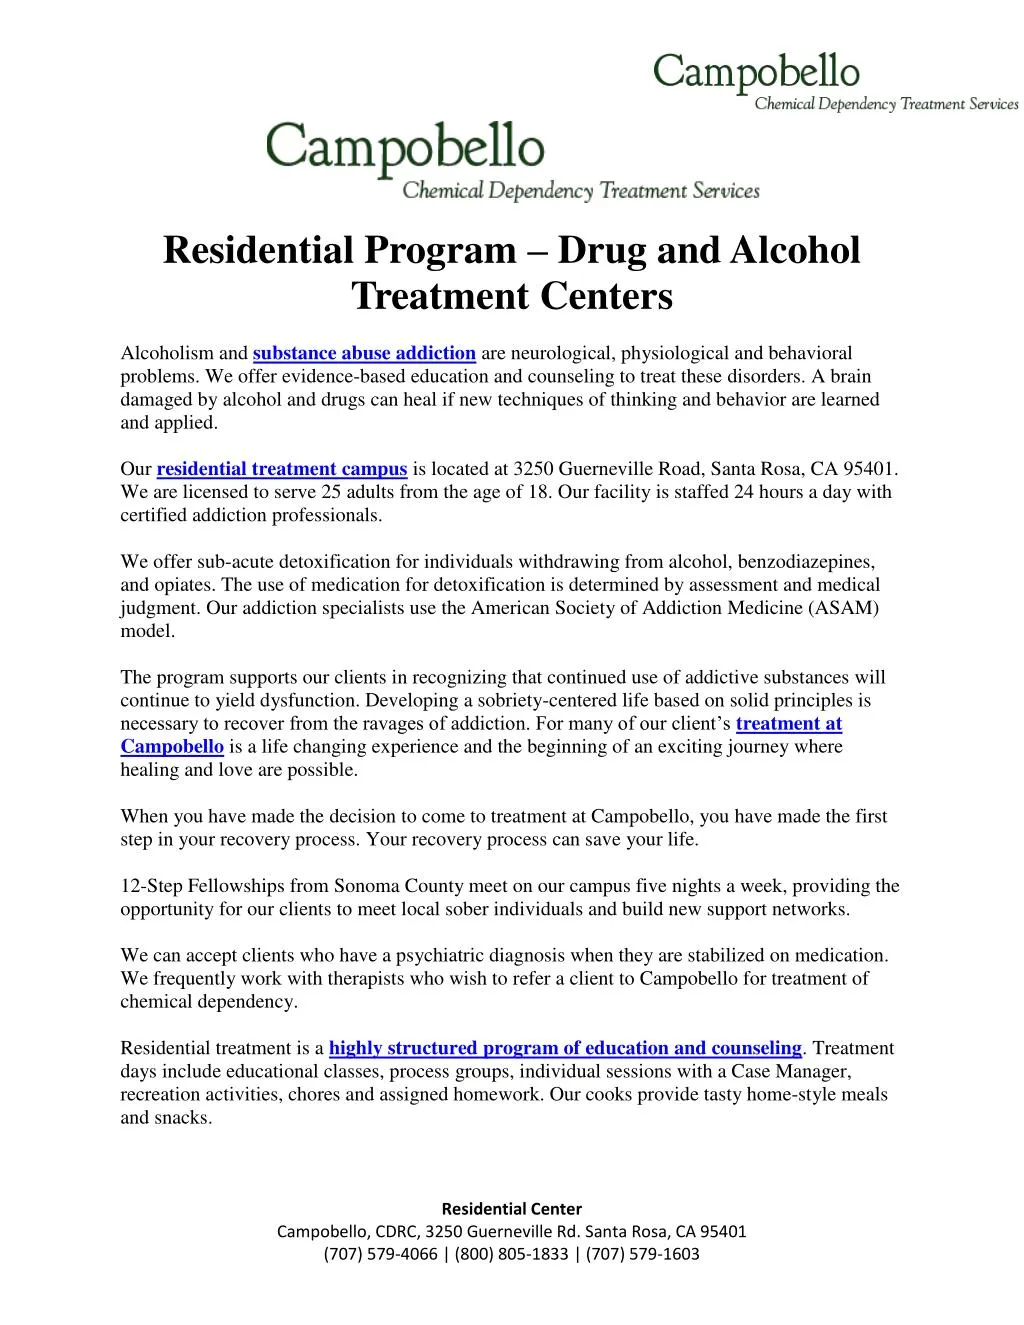 residential program drug and alcohol treatment